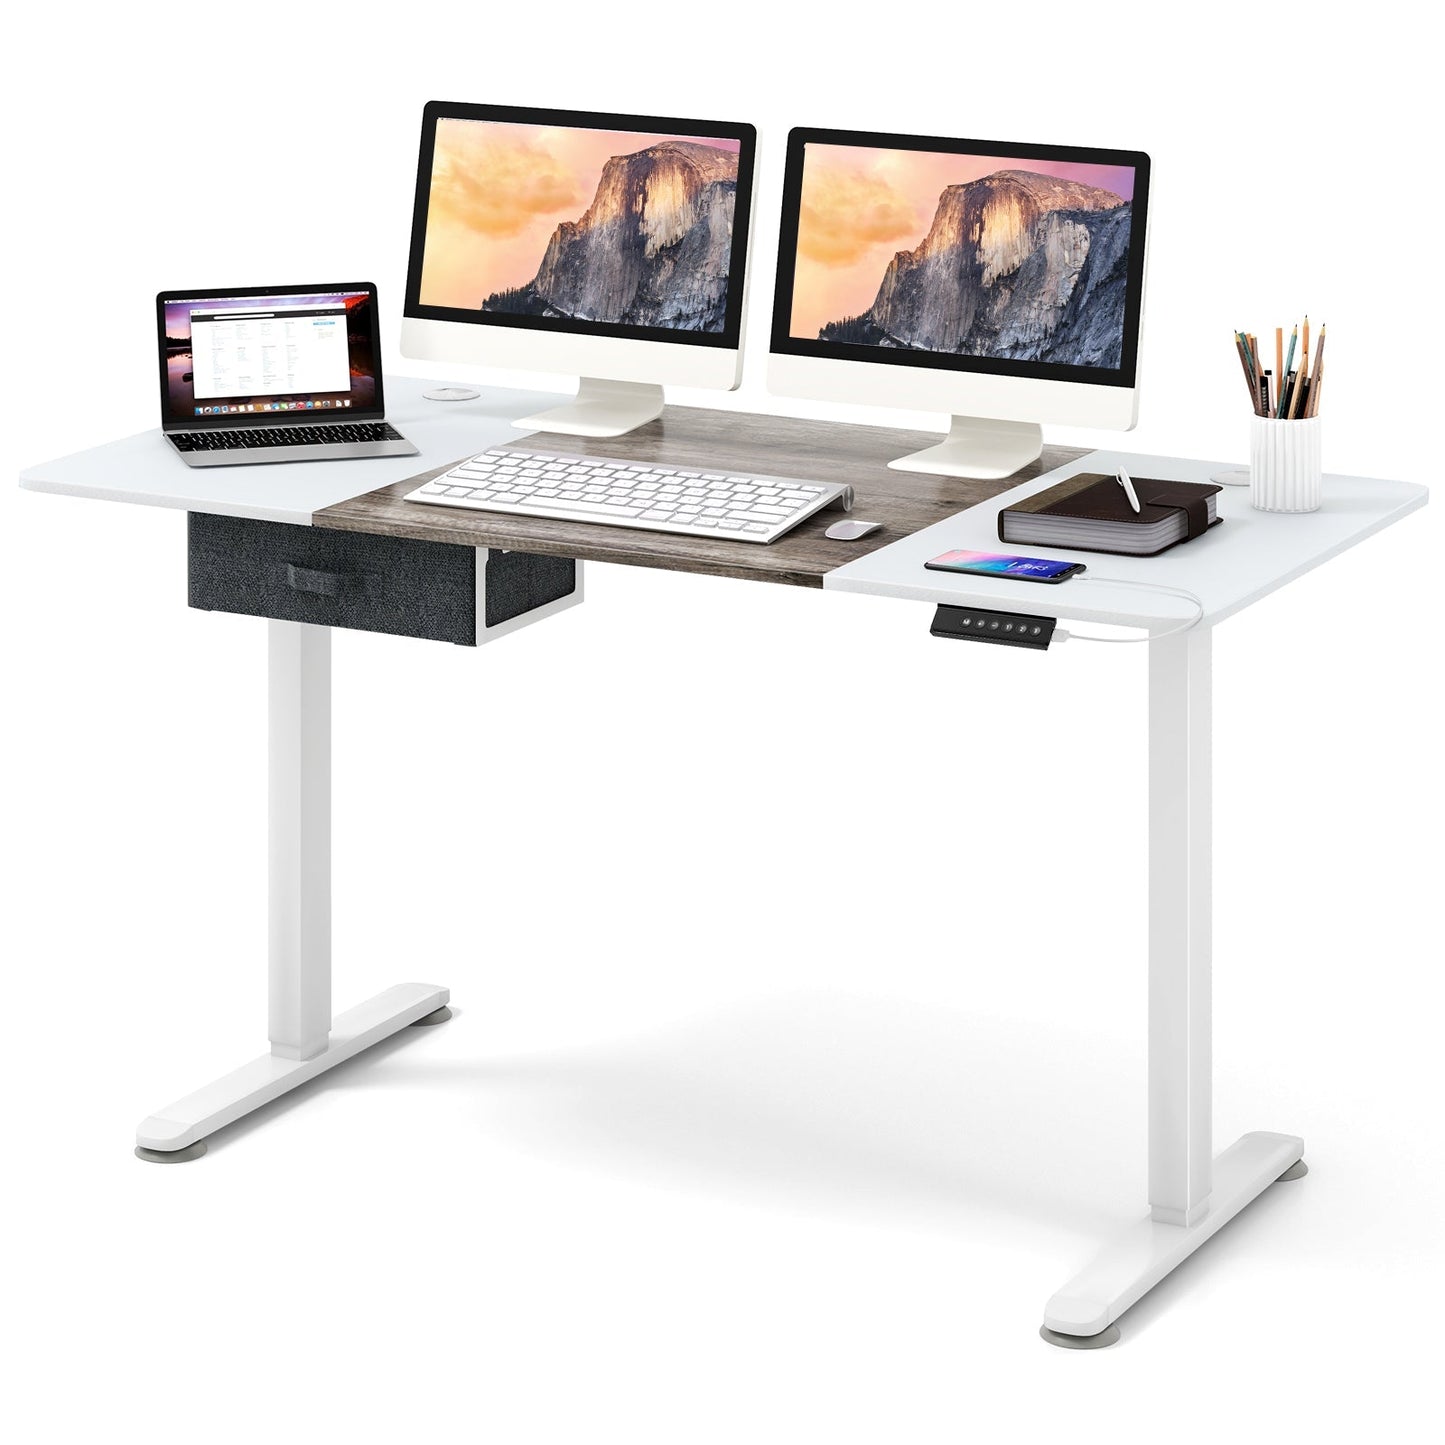 Electric Height Adjustable Standing Desk with USB Charging Port-Grey